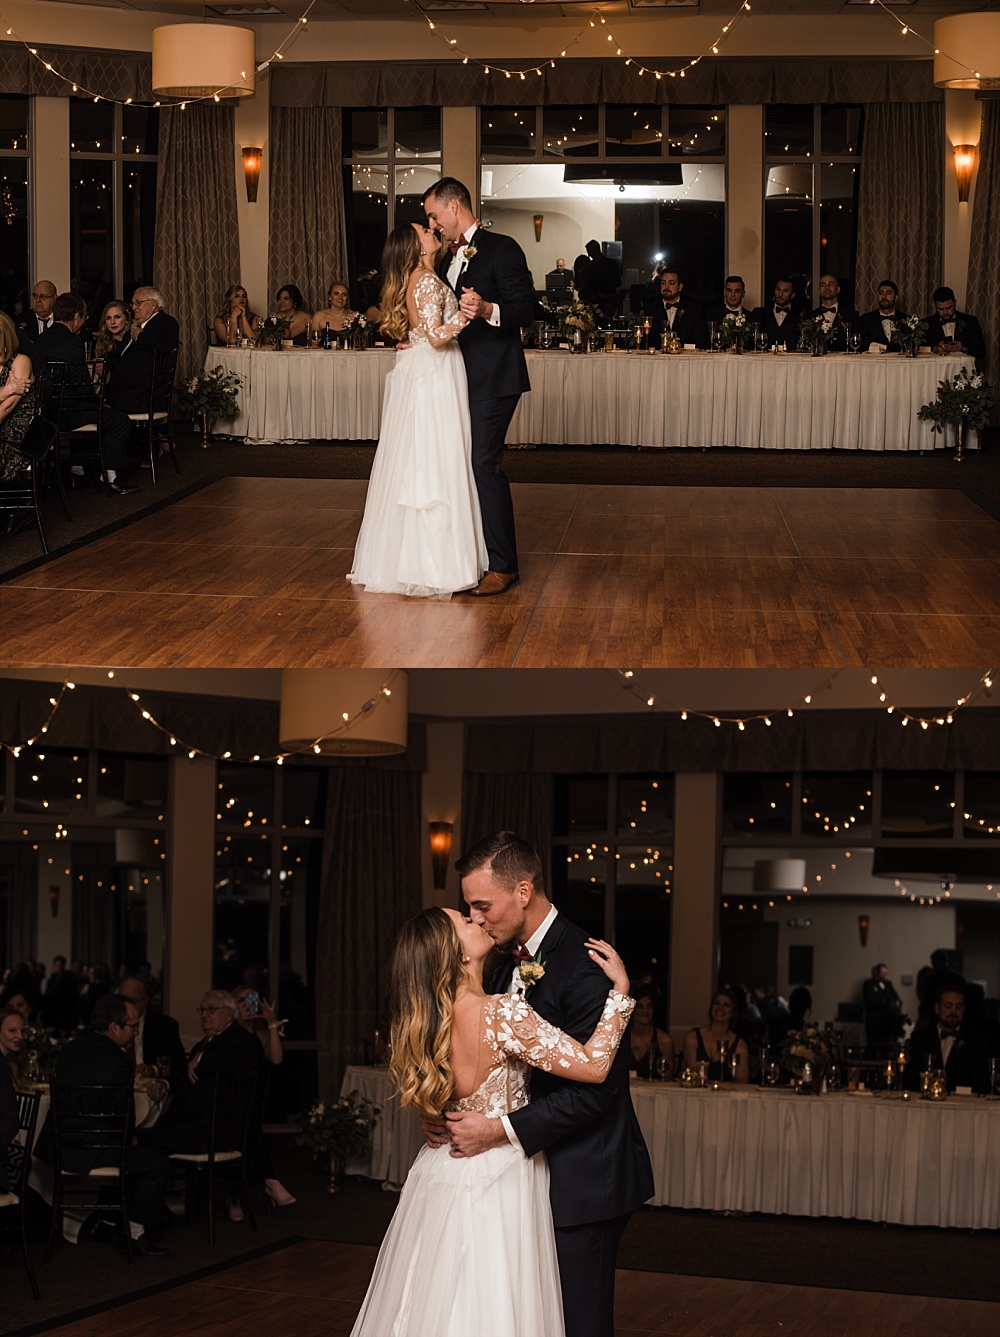 Bride and groom share a first dance during their wedding reception